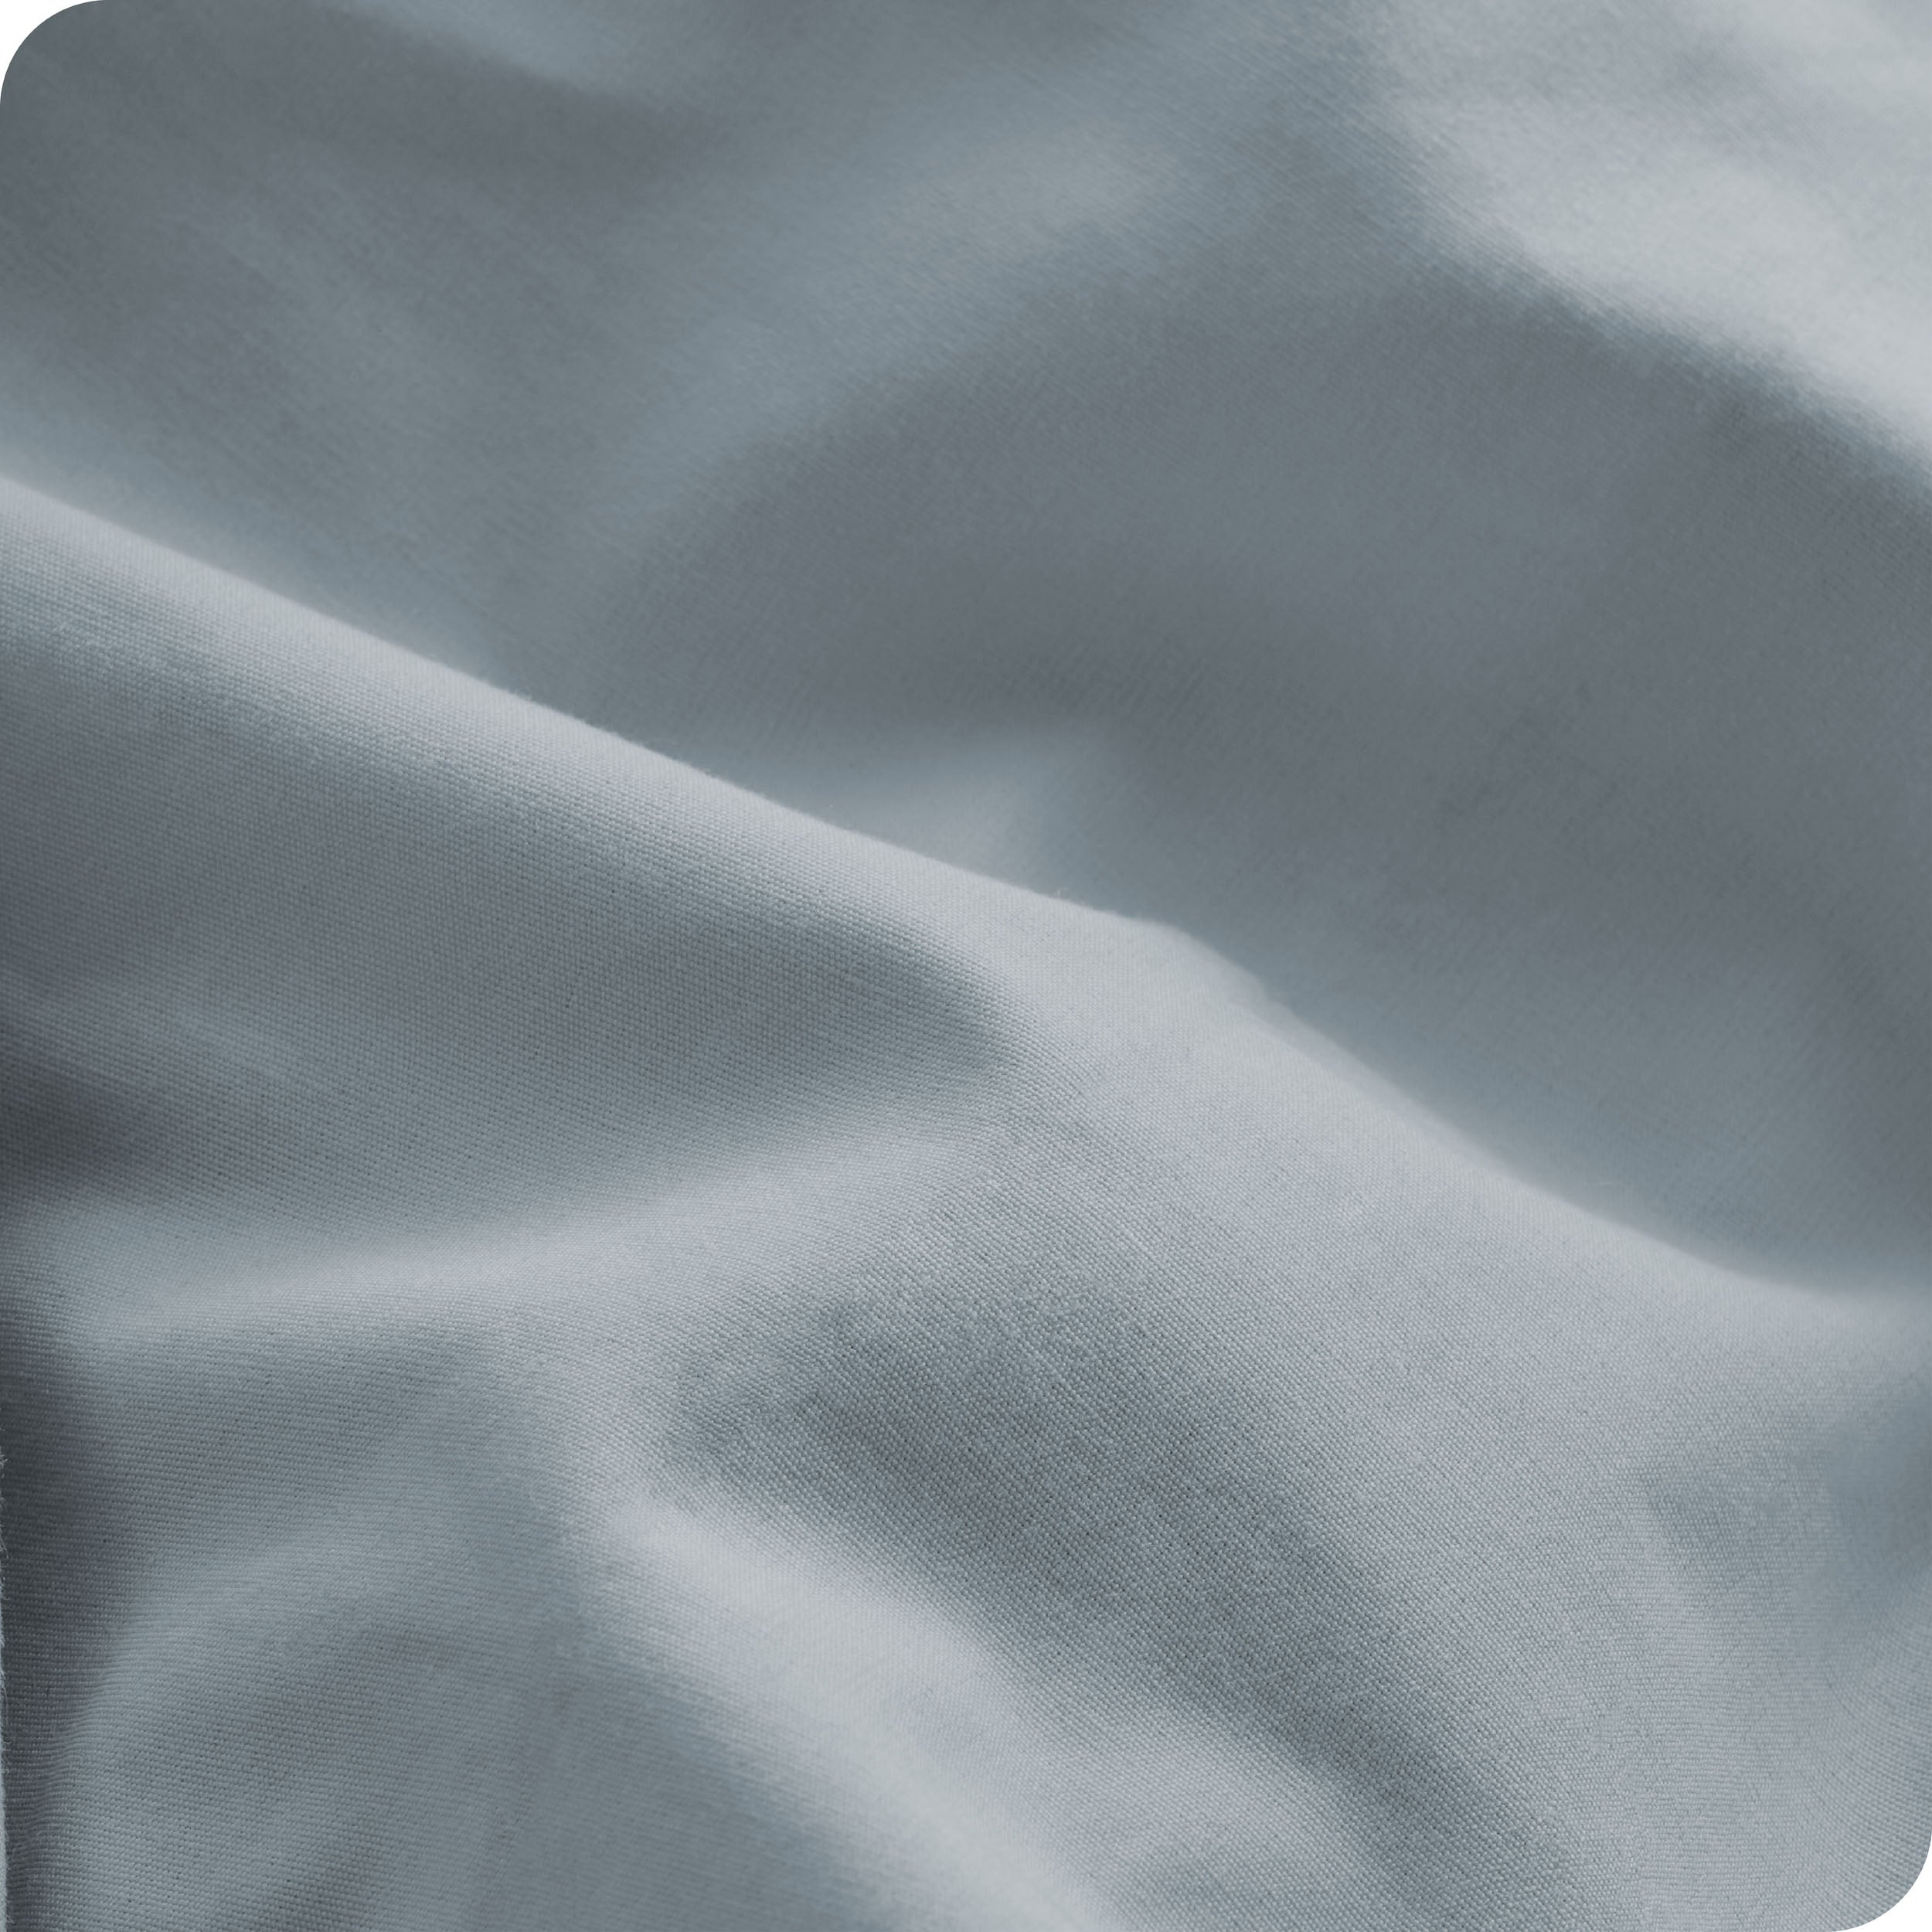 Close up of percale duvet cover fabric